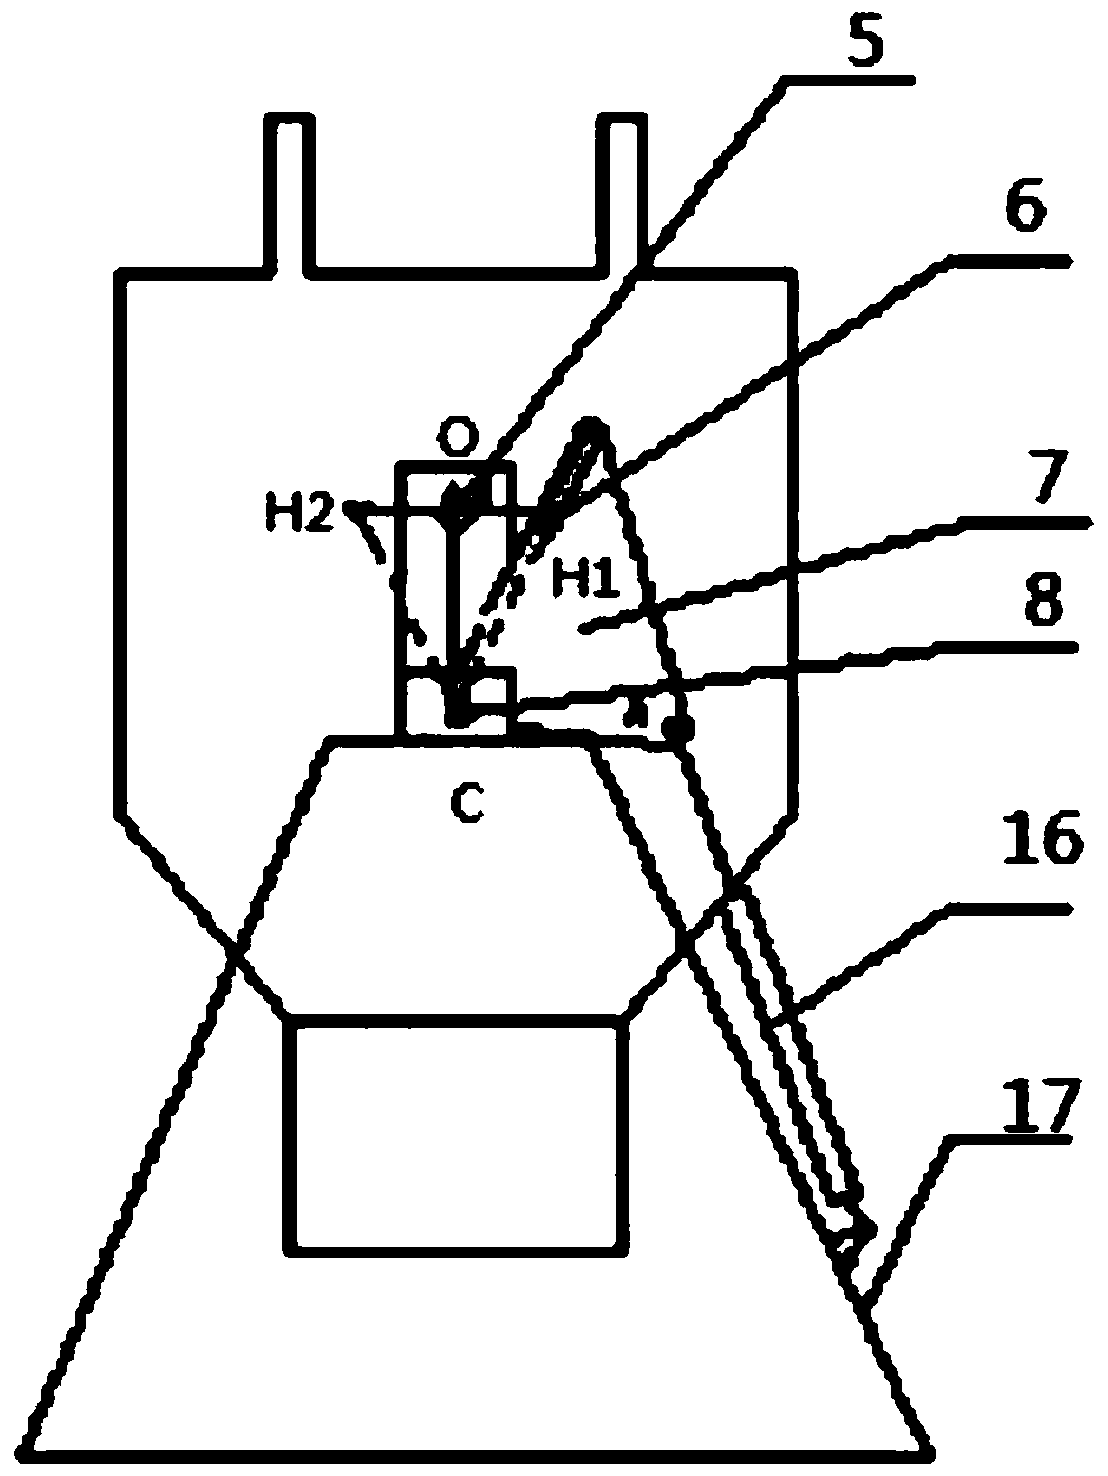 A pulverizer and a method for pulverizing materials using the pulverizer